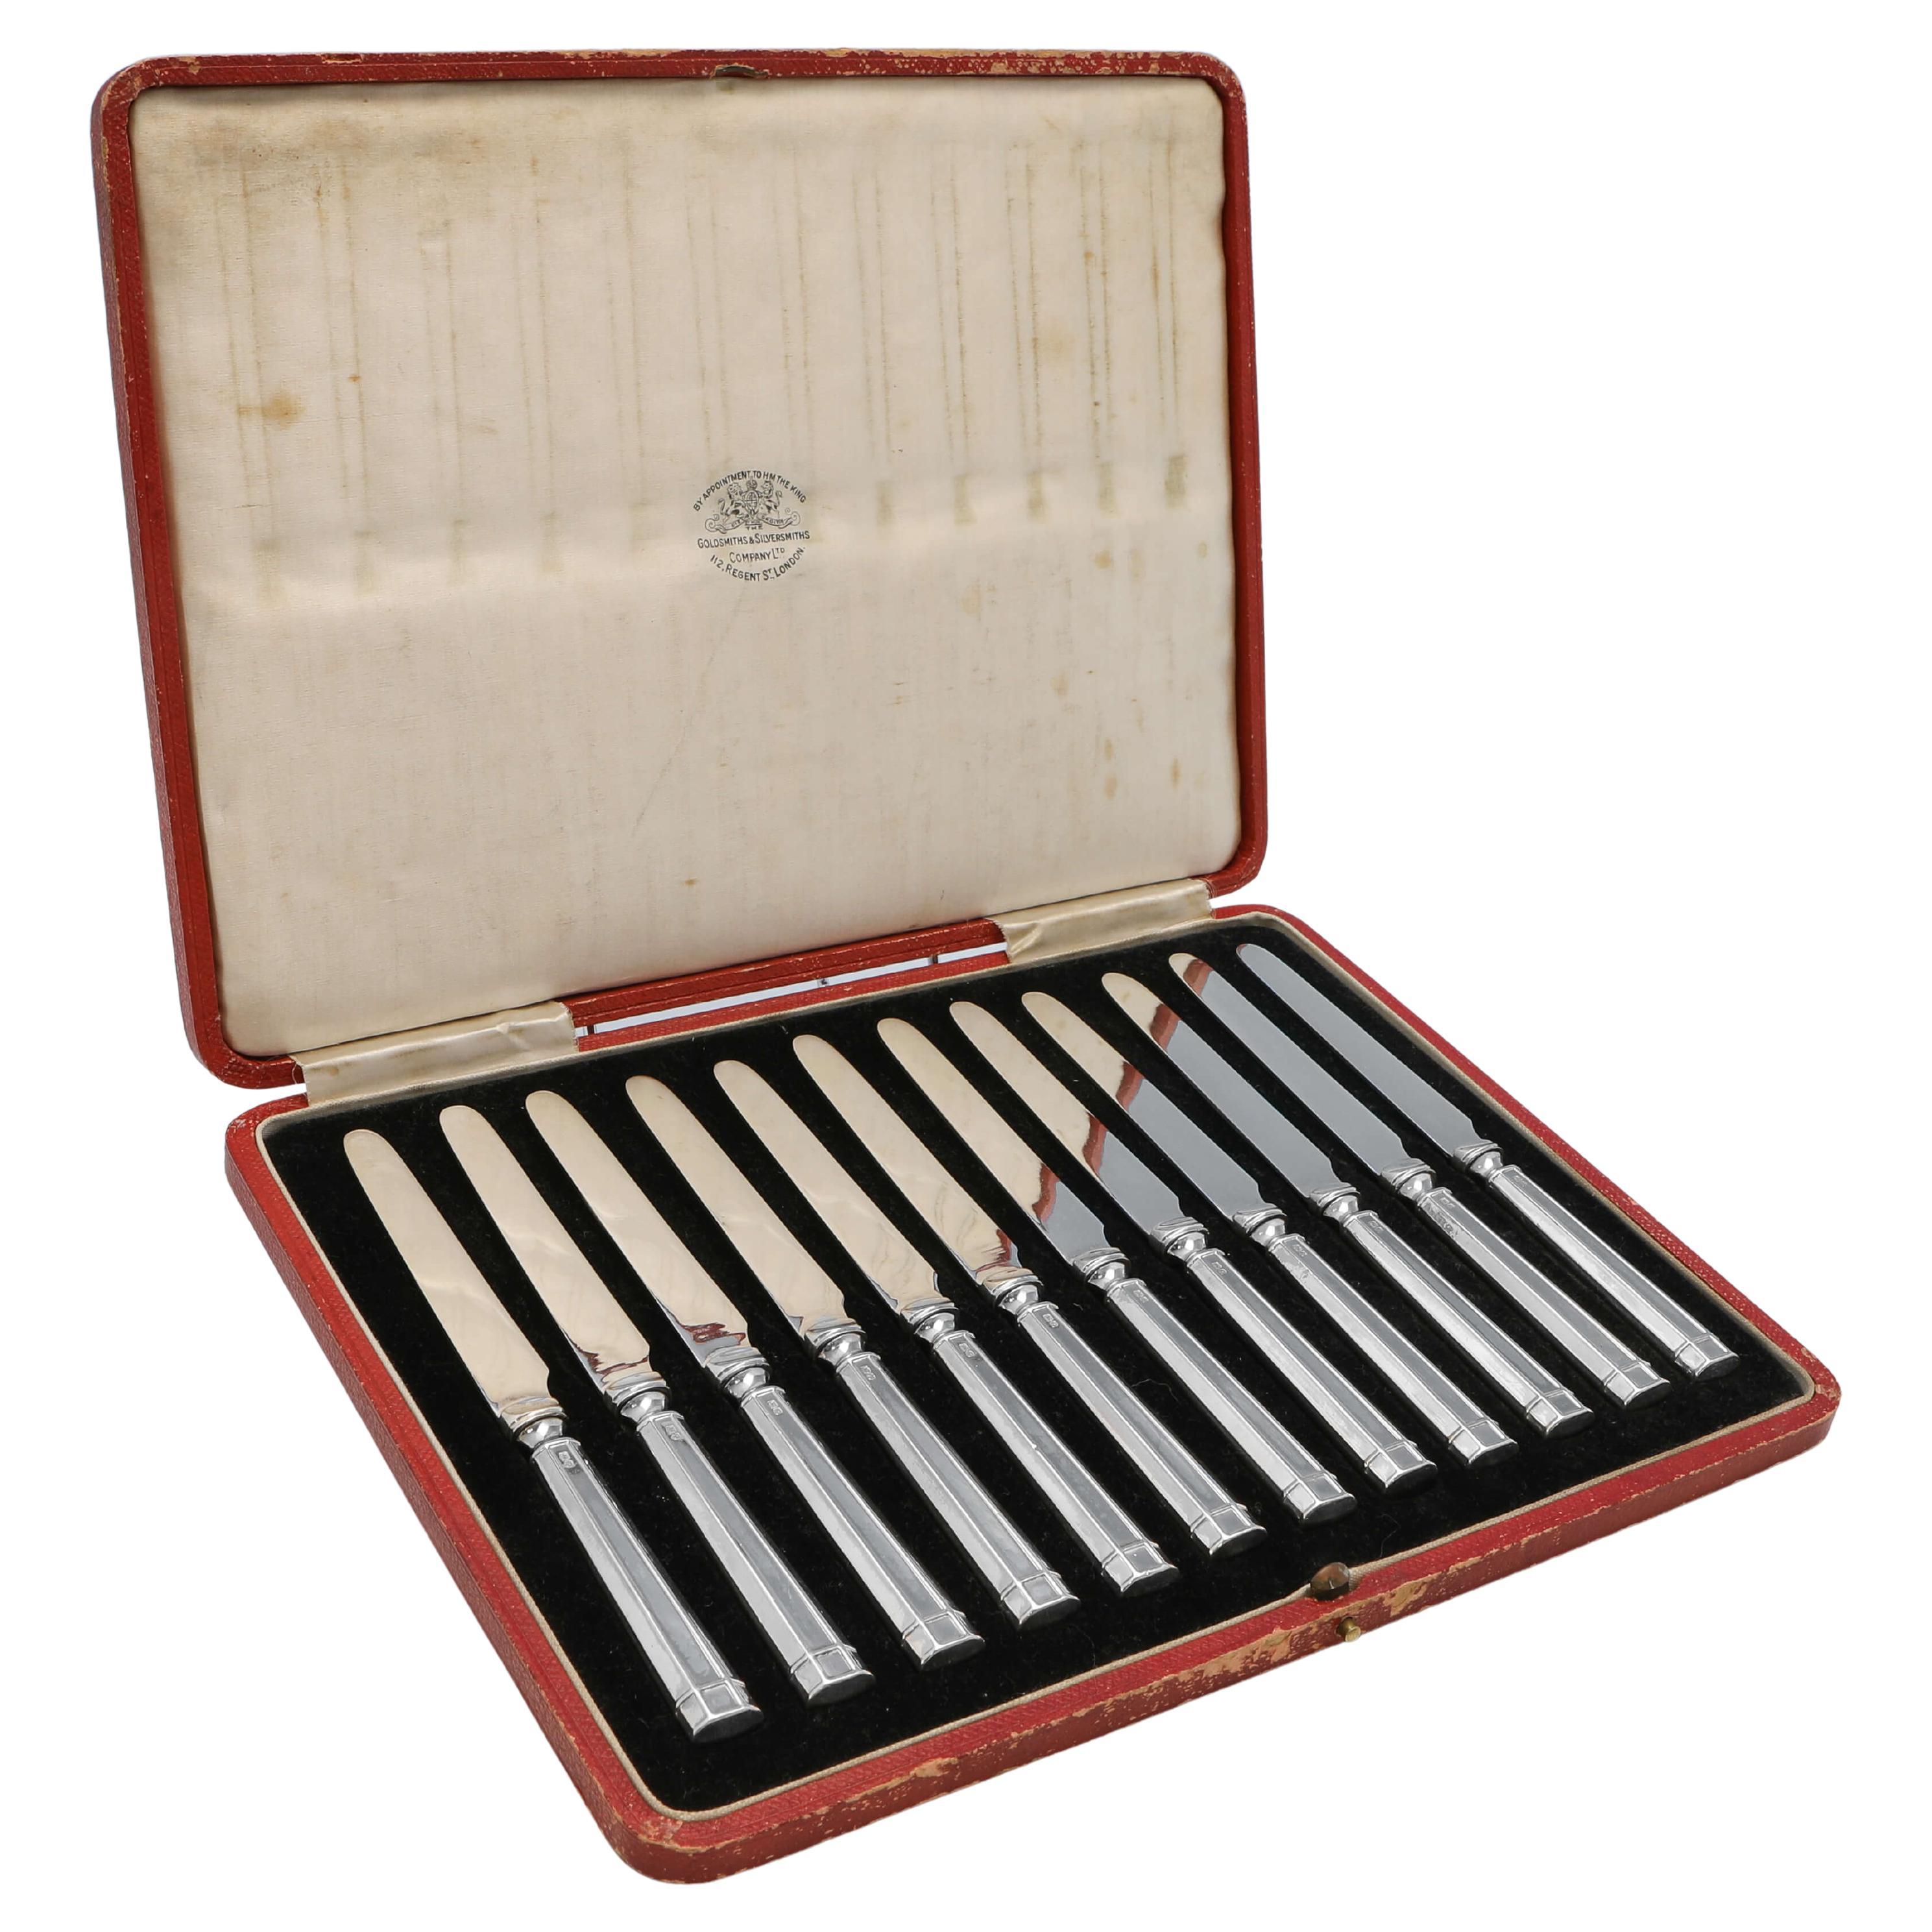 Art Deco Sterling Silver Set Of 12 Butter Knives 1932 Goldsmiths & Silversmiths For Sale